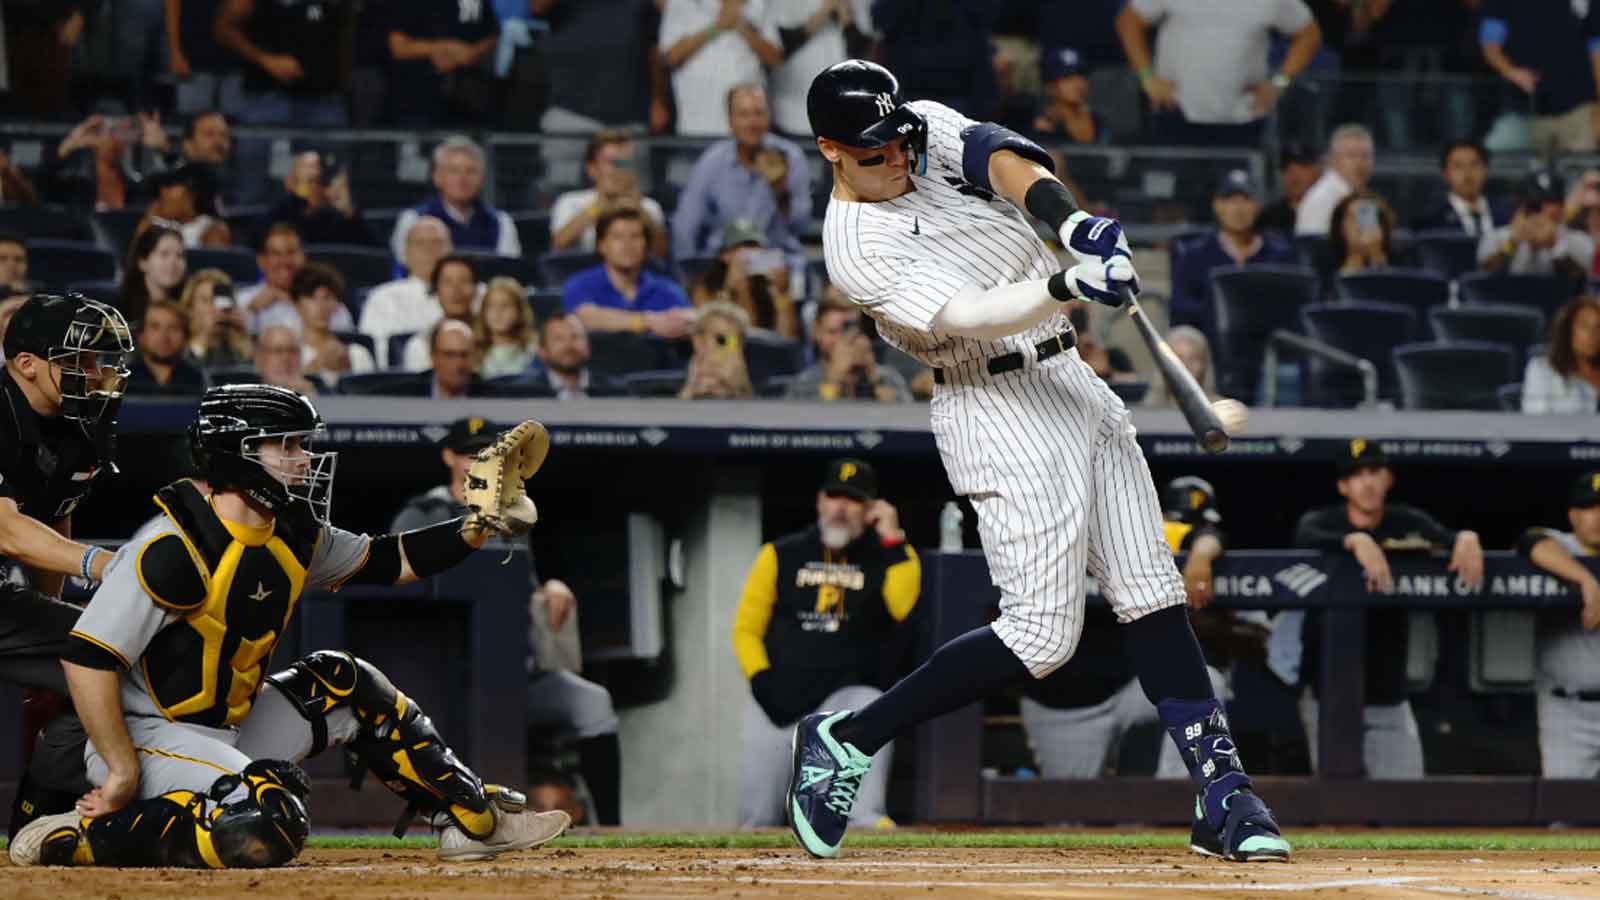 Aaron Judge's Swing Changes, Page 2